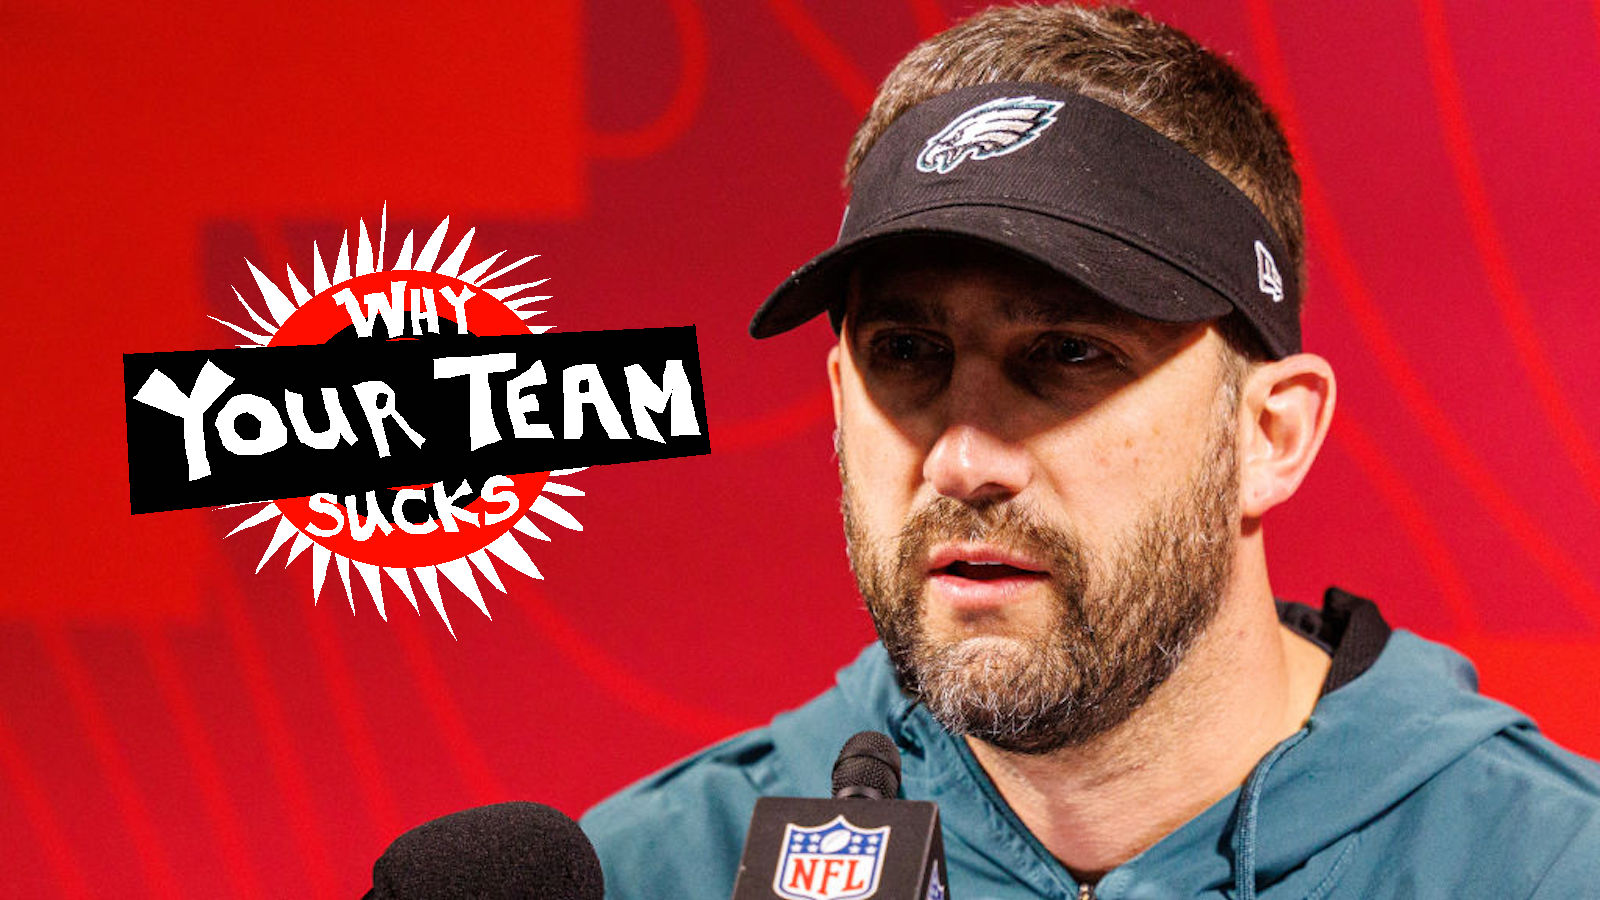 Philadelphia Eagles head coach Nick Sirianni speaks in a post-game interview after Super Bowl LVII between the Philadelphia Eagles and the Kansas City Chiefs on Sunday, February 12th, 2023 at State Farm Stadium in Glendale, AZ.